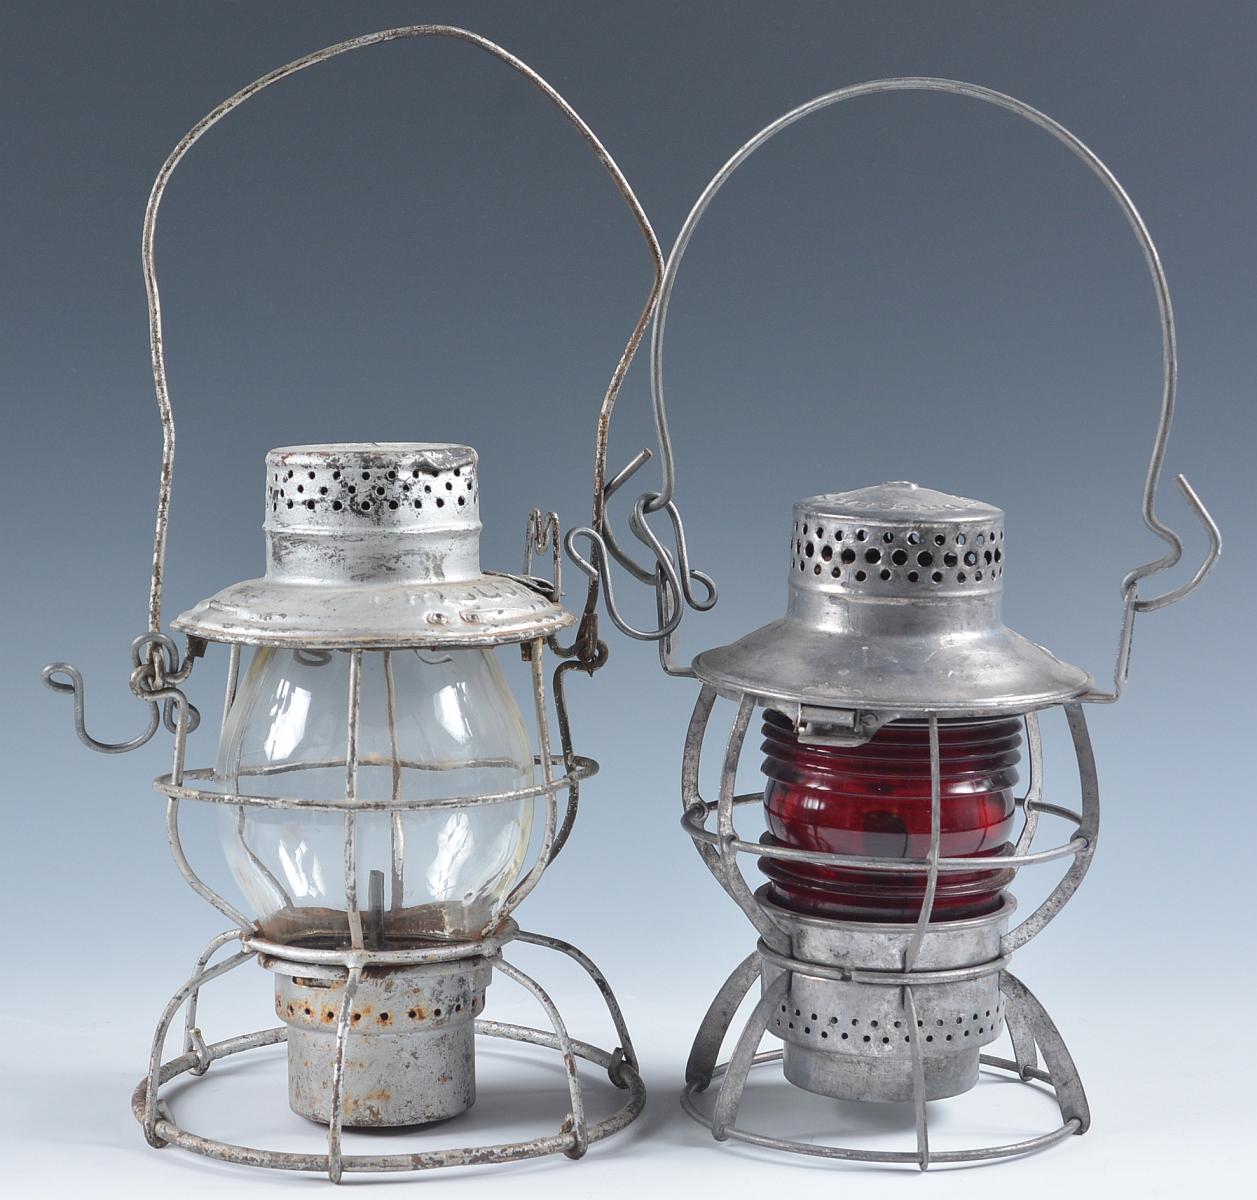 LANTERNS WITH RAILROAD MARKS ON FRAME AND GLOBE